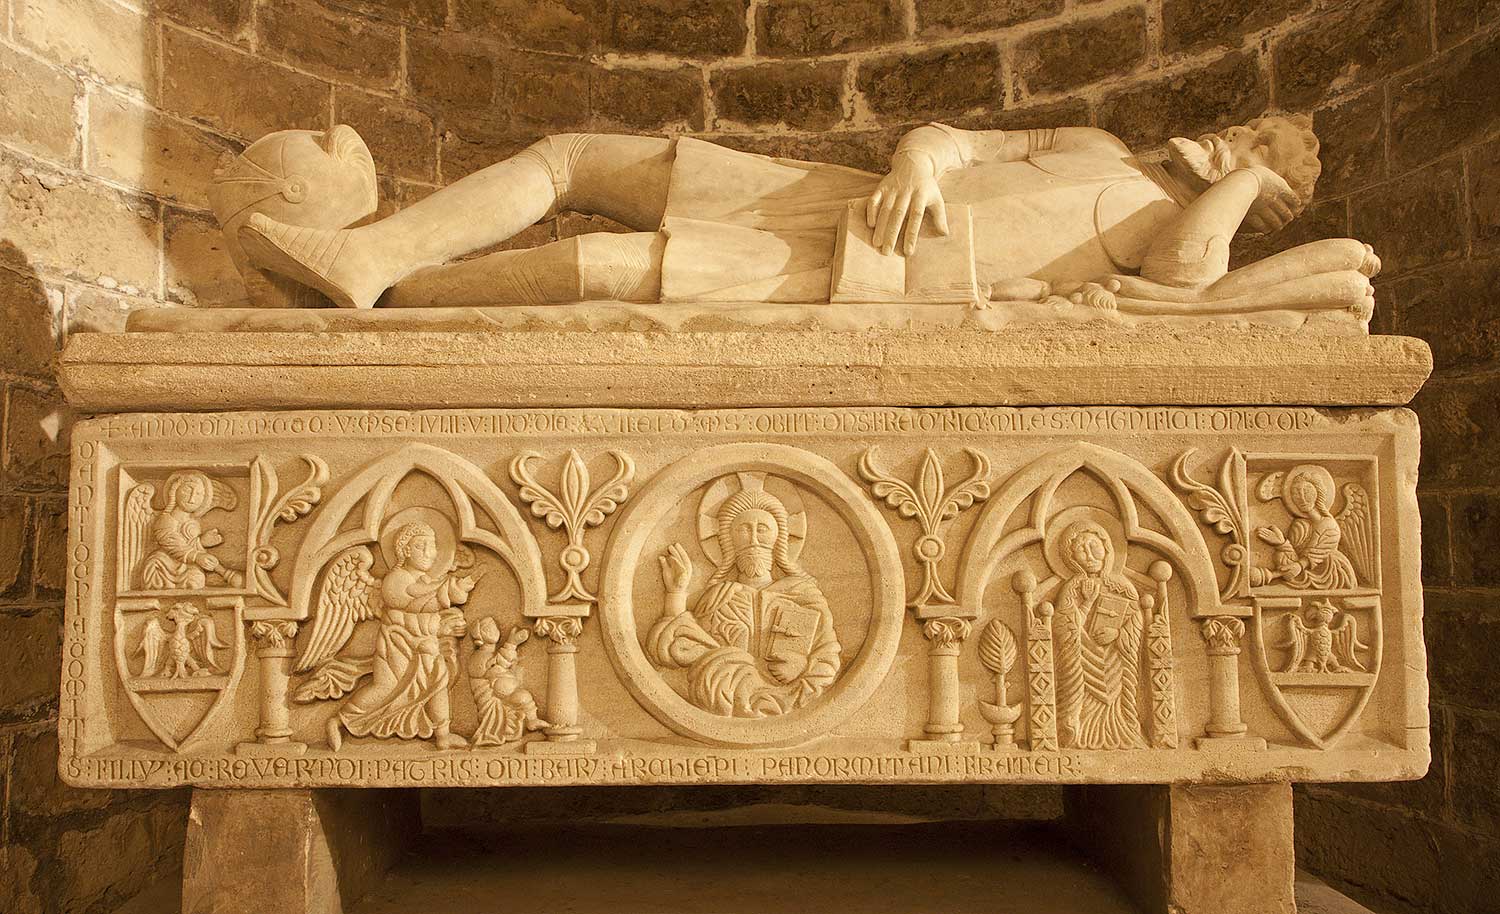 One of the most detailed sarcophagi in the Cathedral of Palermo.